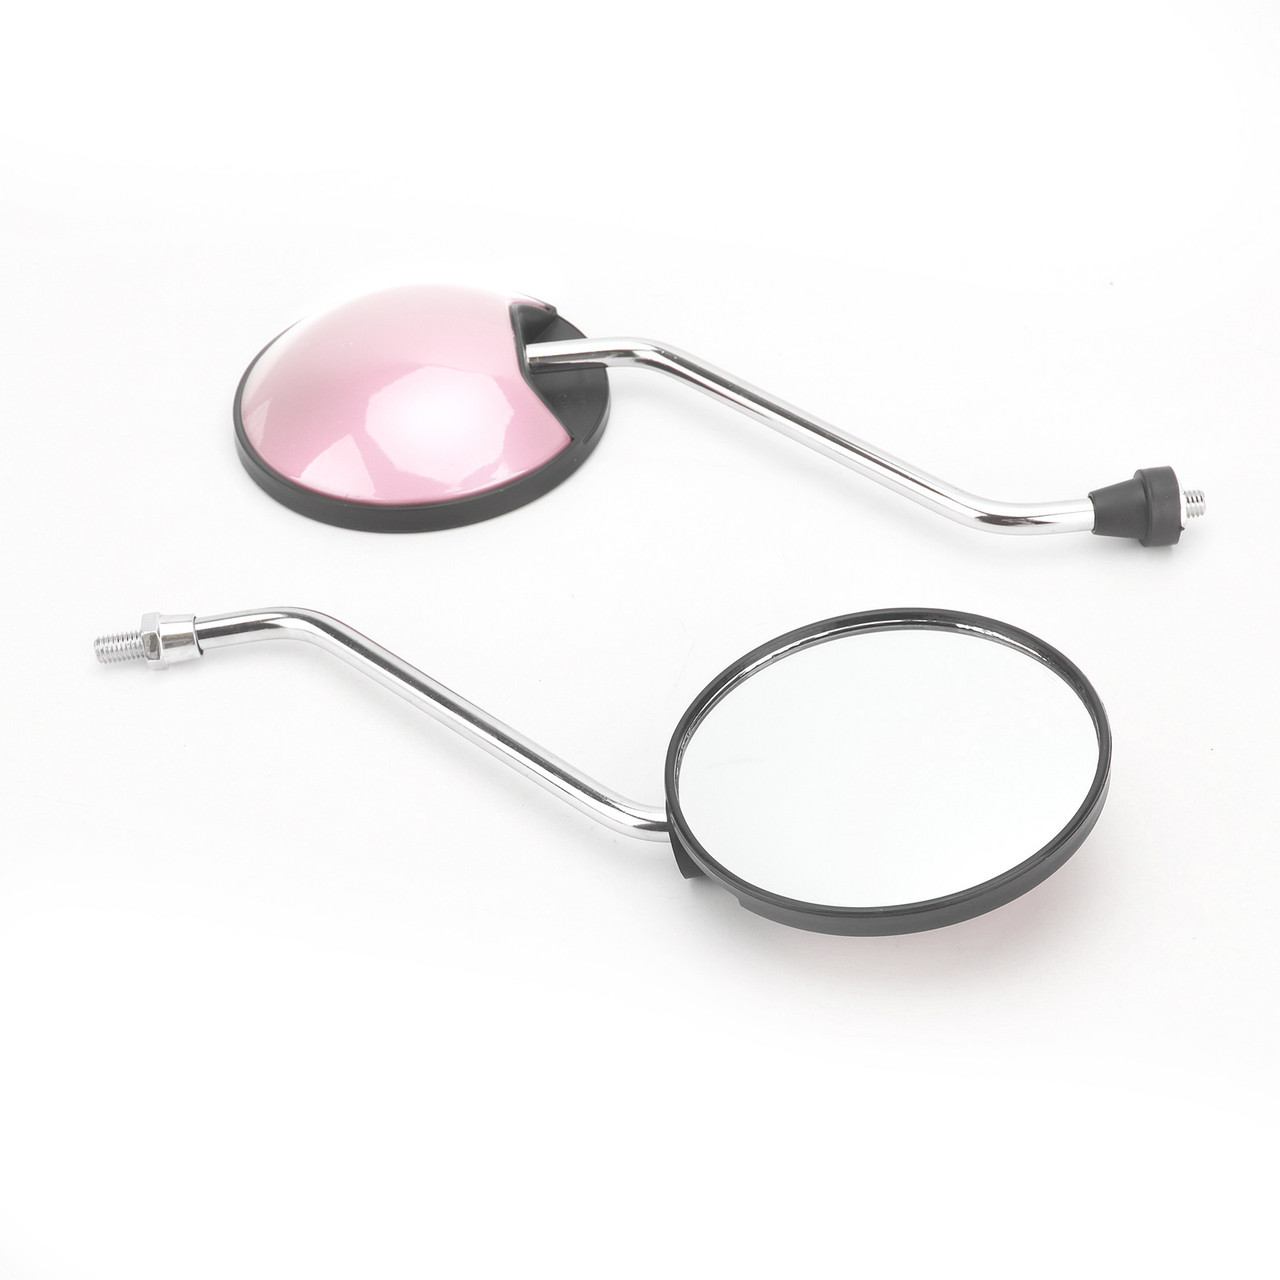 Pair 8mm Rearview Mirrors fits for Suzuki Scooter Motorcycle Moped Bike ATV with 8MM threads Pink~BC1